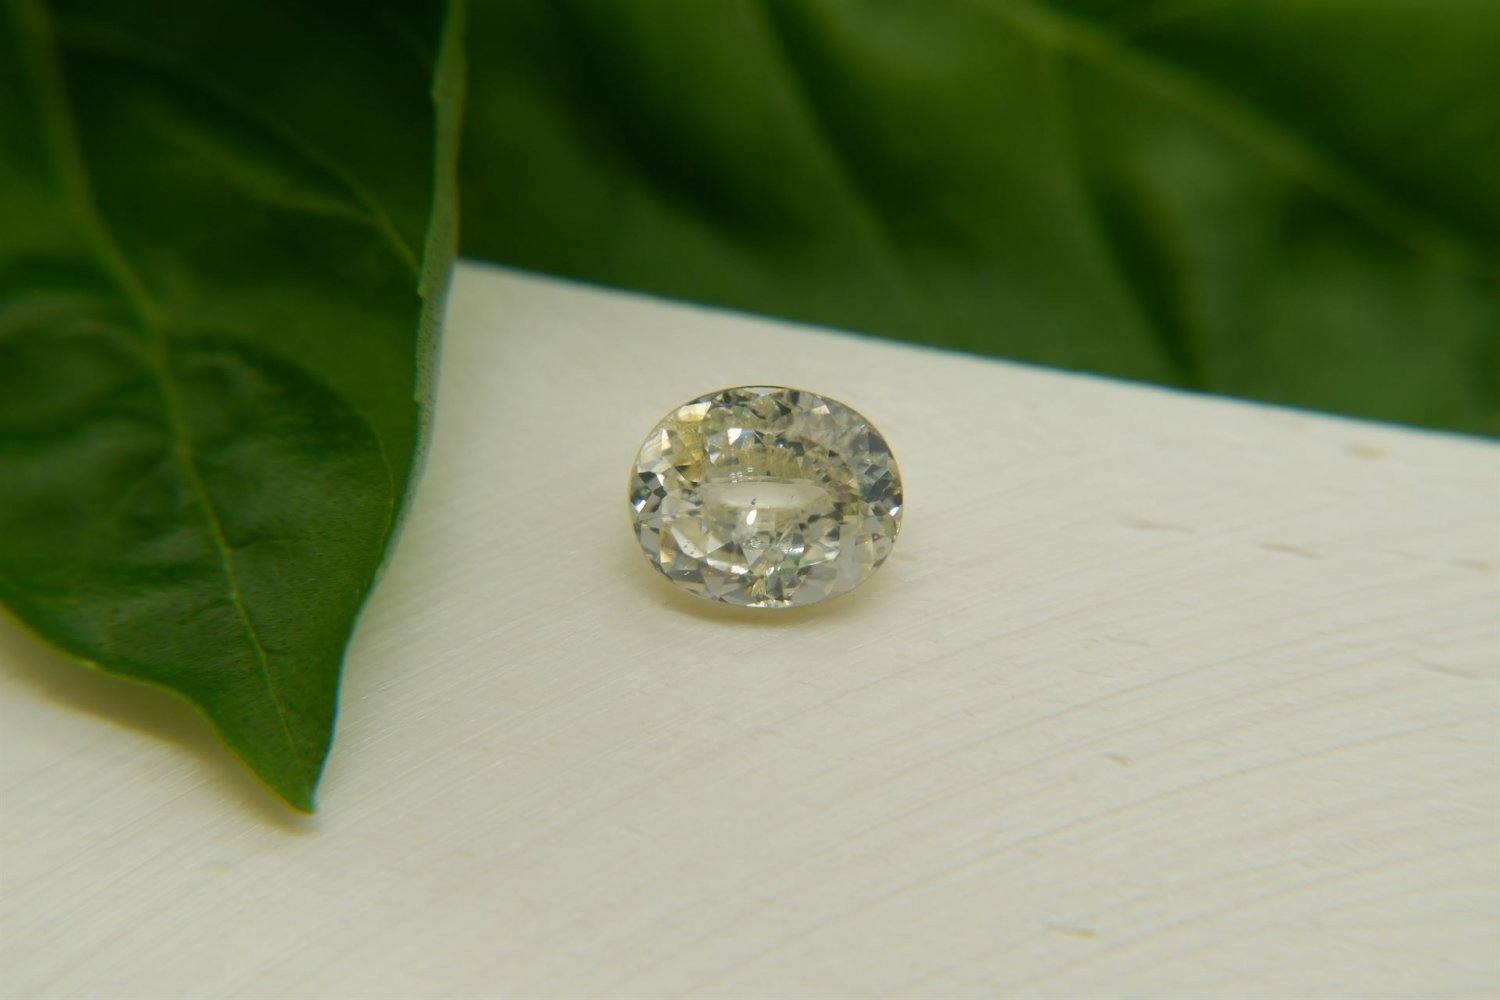 1.50 ct  Pastel Yellow Sapphire, handcrafted cut premium handcrafted oval cut with lustrous finish S